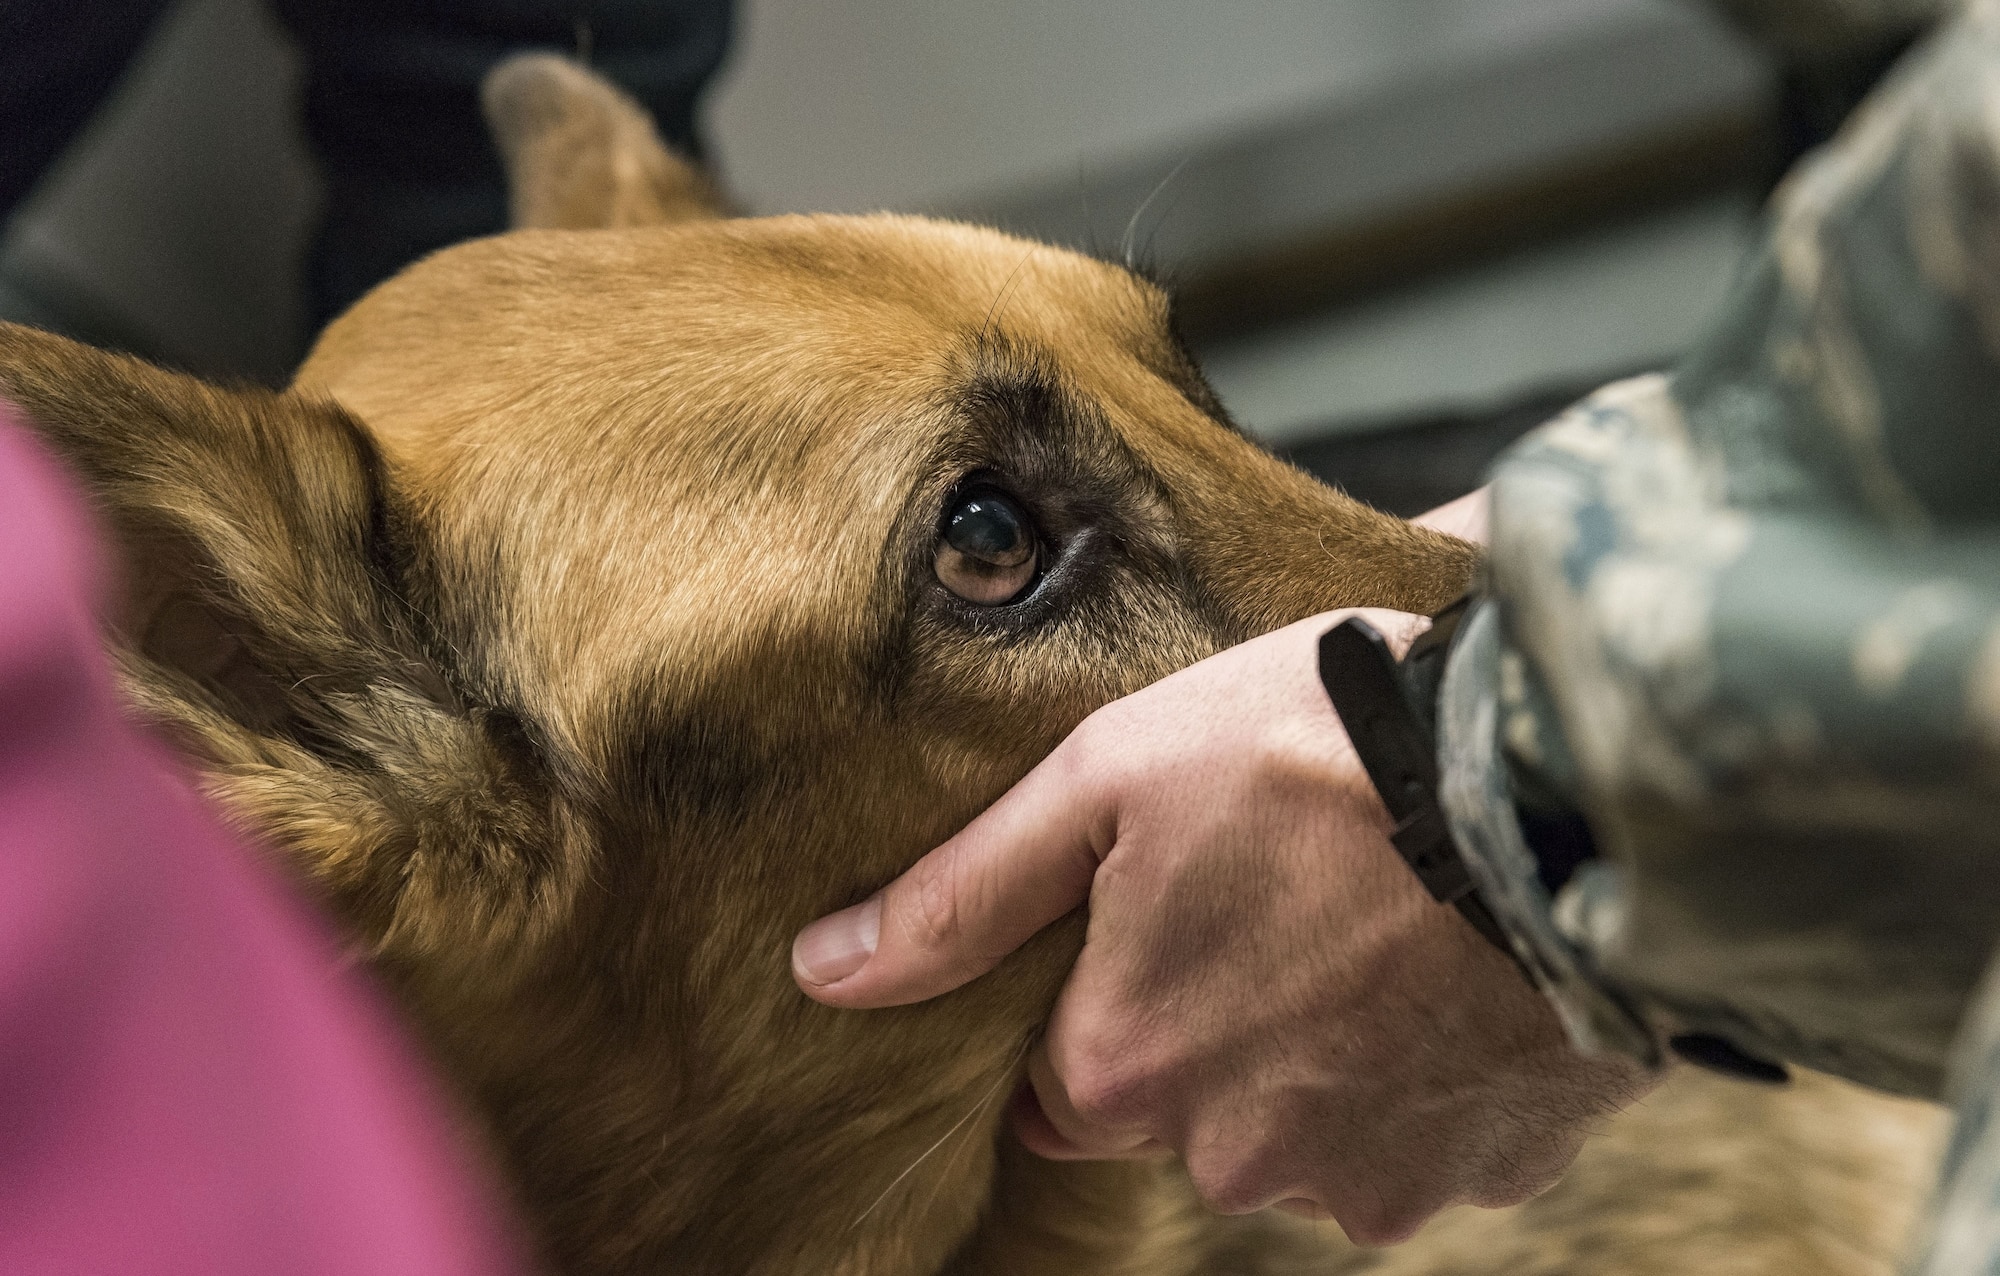 Tech. Sgt. Matthew Salter, 436th Security Forces Squadron military working dog kennel master, cups the snout of retired Military Working Dog Rico while veterinary staff prepare to insert an intravenous needle into one of his front legs Jan. 24, 2018, at the Veterinary Treatment Facility on Dover Air Force Base, Del. MWD Rico was Salter’s first MWD when he arrived at Dover AFB, September 2008. (U.S. Air Force photo by Roland Balik)